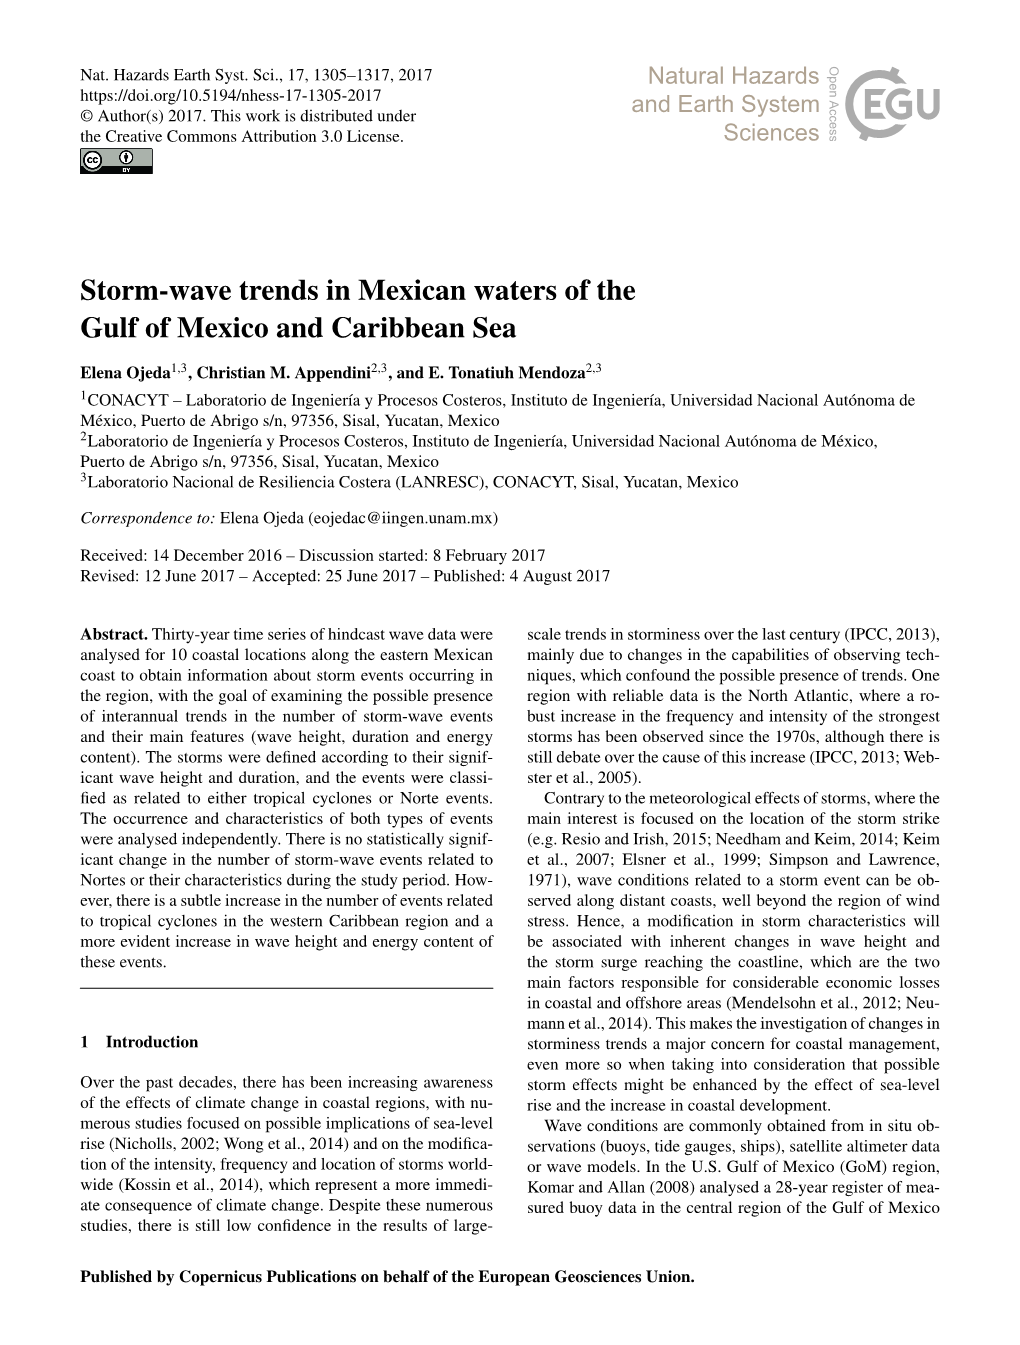 Storm-Wave Trends in Mexican Waters of the Gulf of Mexico and Caribbean Sea